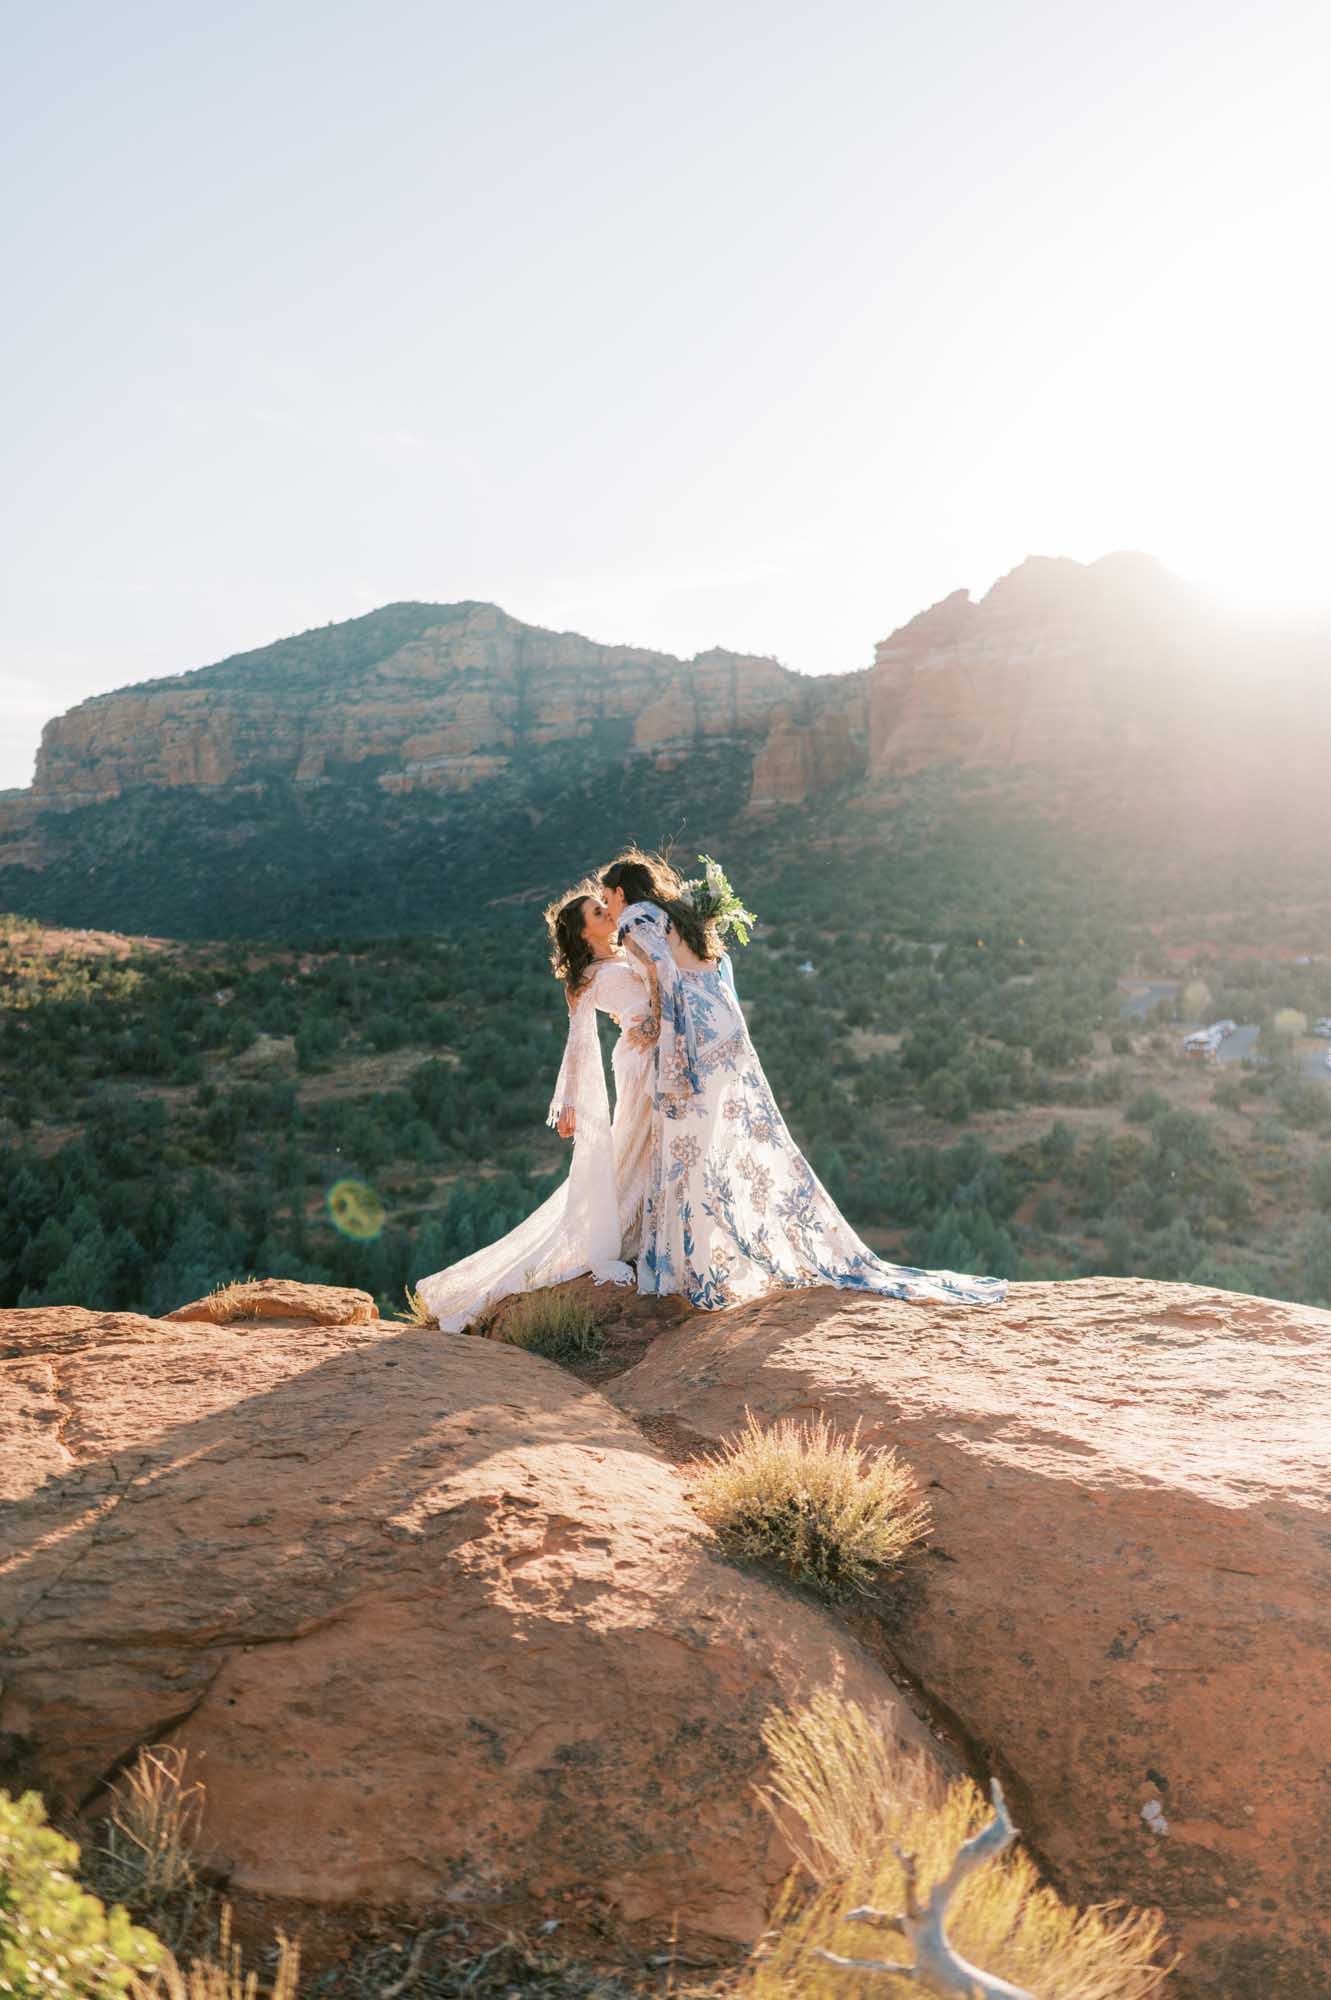 Elopement inspiration in Sedona, Arizona with flowy gowns and jaw-dropping views | Xsperience Photography | Featured on Equally Wed, the leading LGBTQ+ wedding magazine